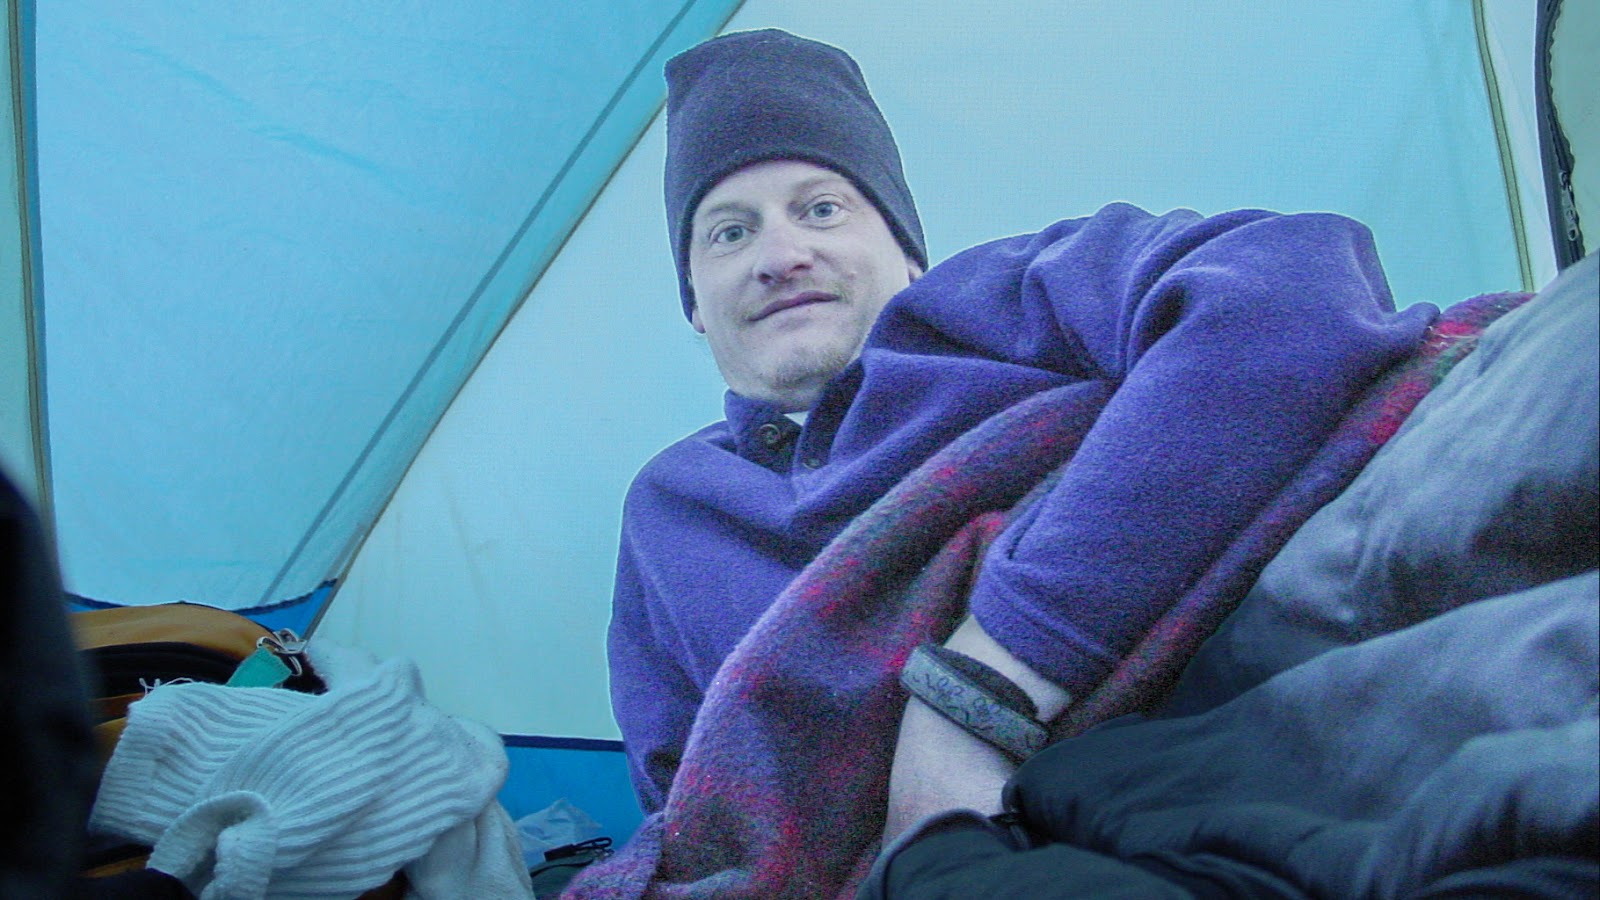 A man looks up from a sleeping bag in a crowded tent.